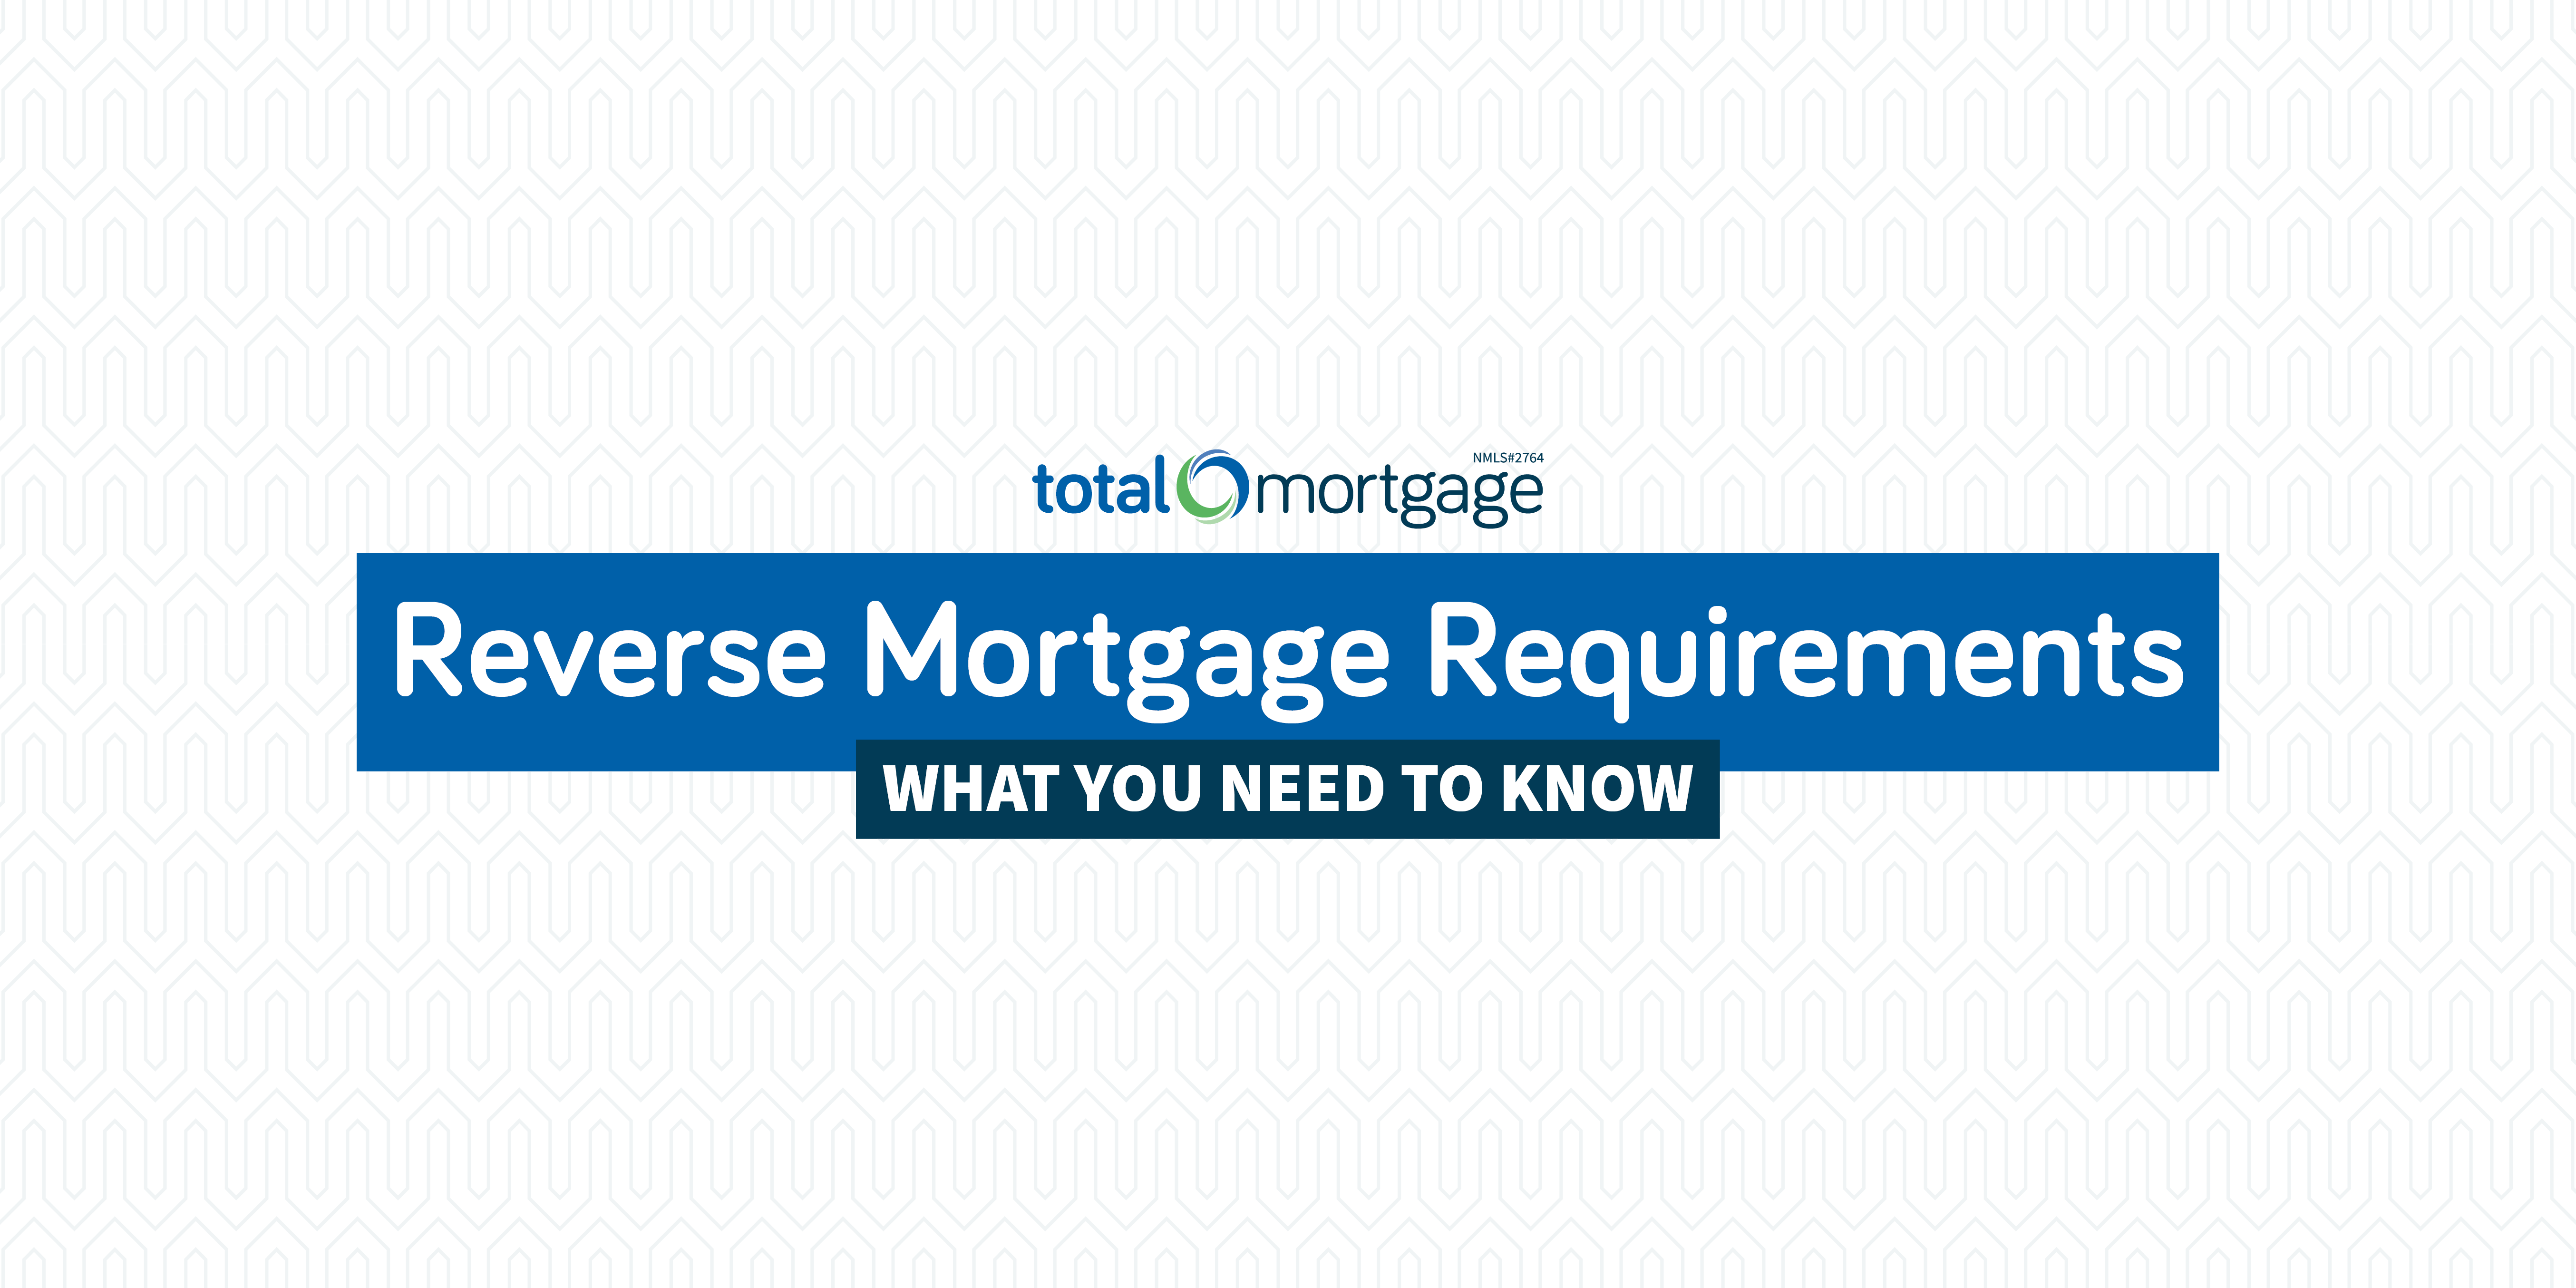 Reverse Mortgage Requirements: What You Need to Know - Total Mortgage